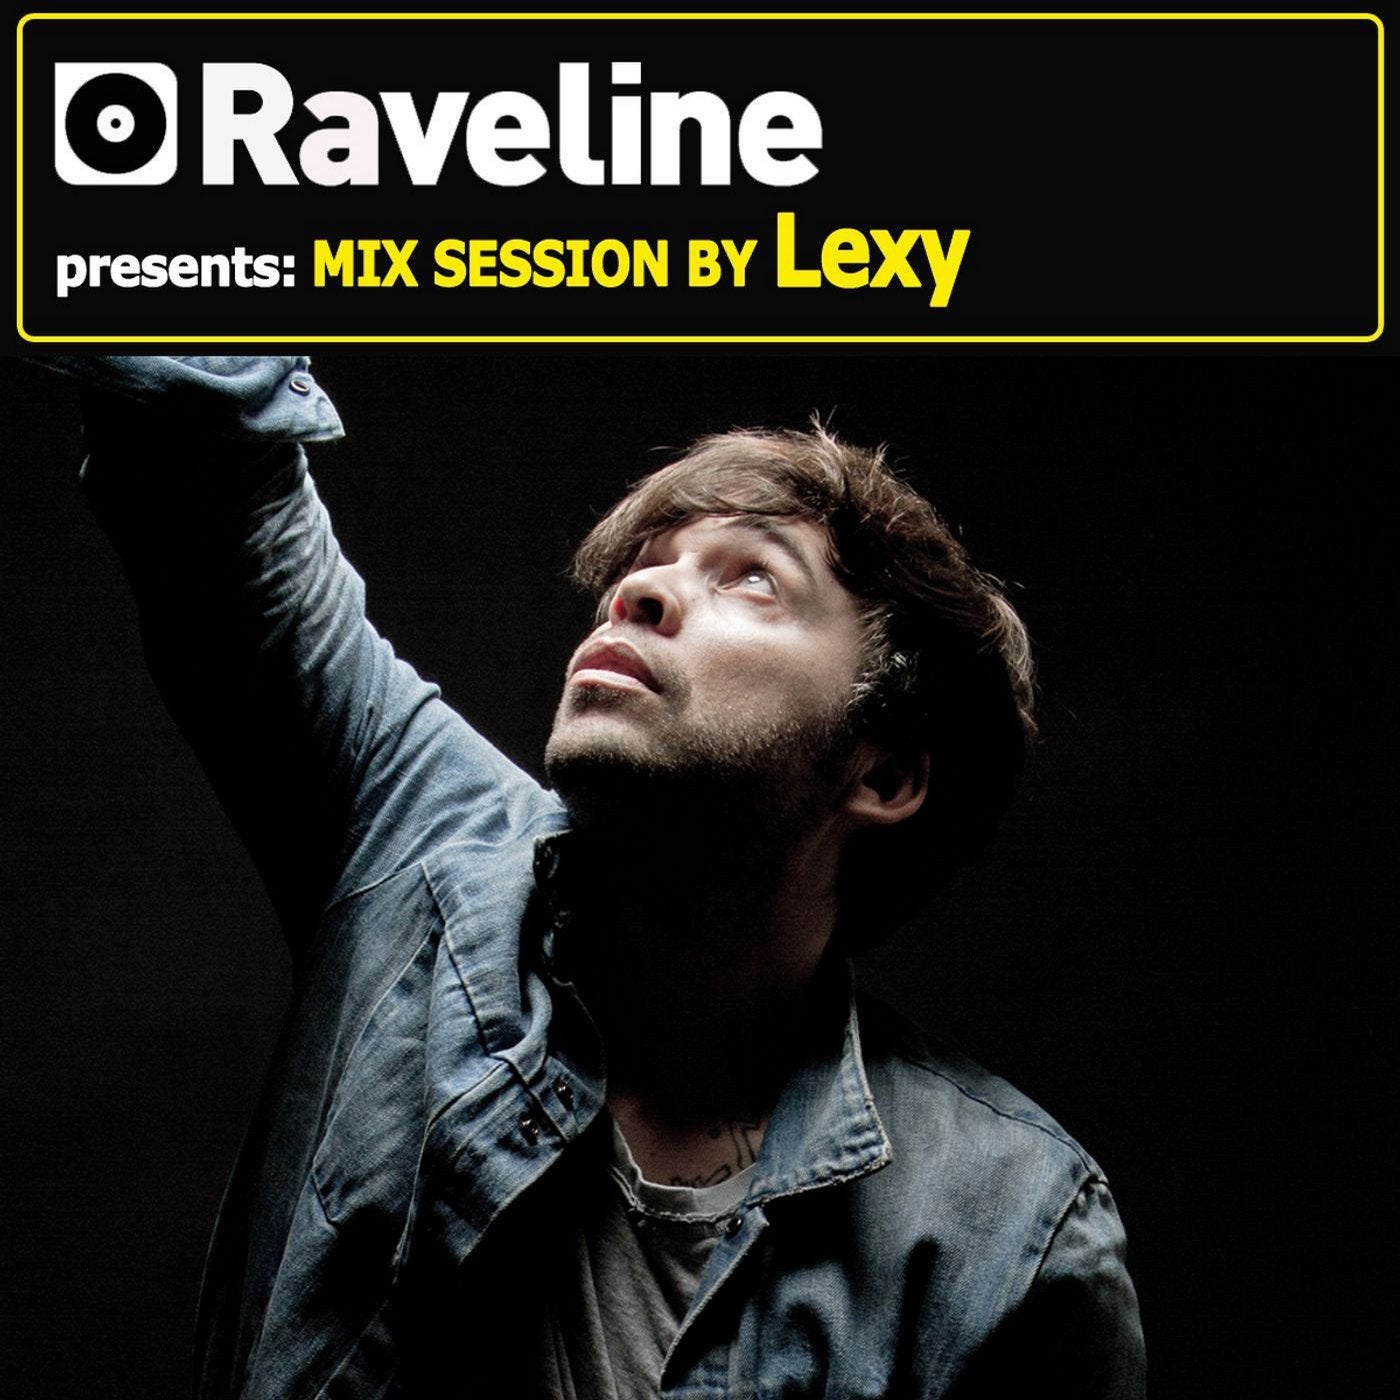 Raveline Mix Session By Lexy